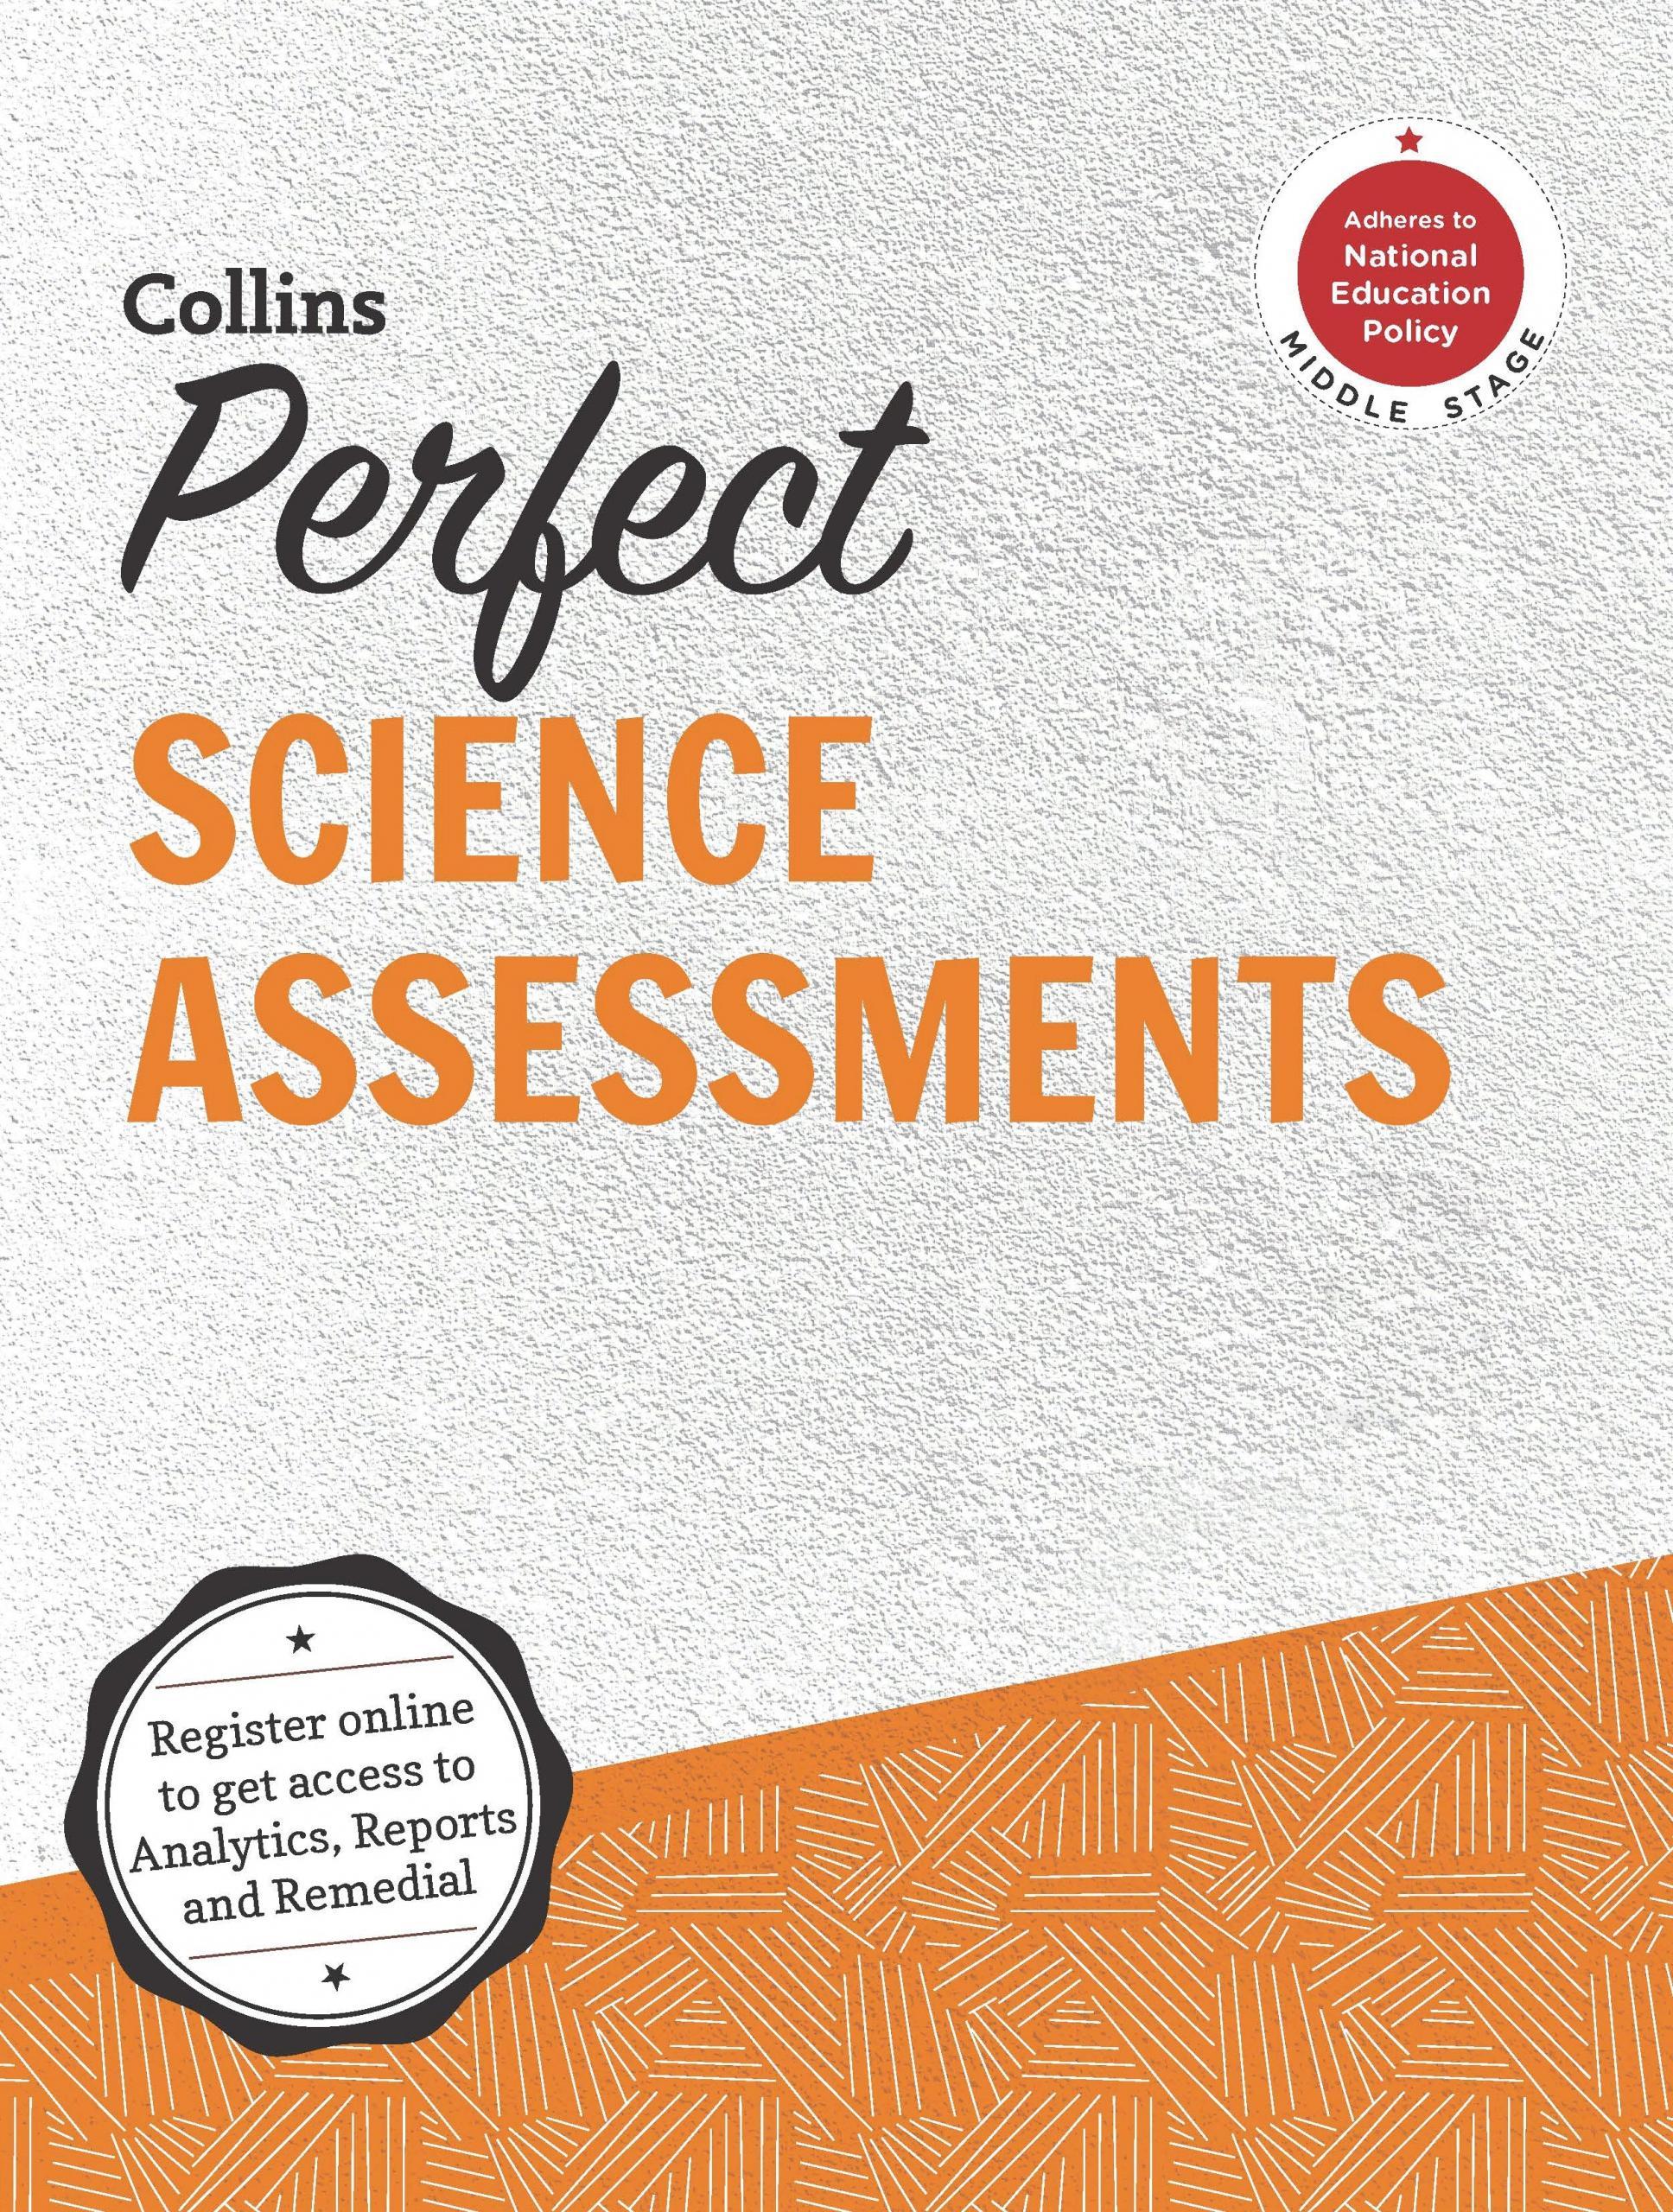 Collins Perfect Science Assessments